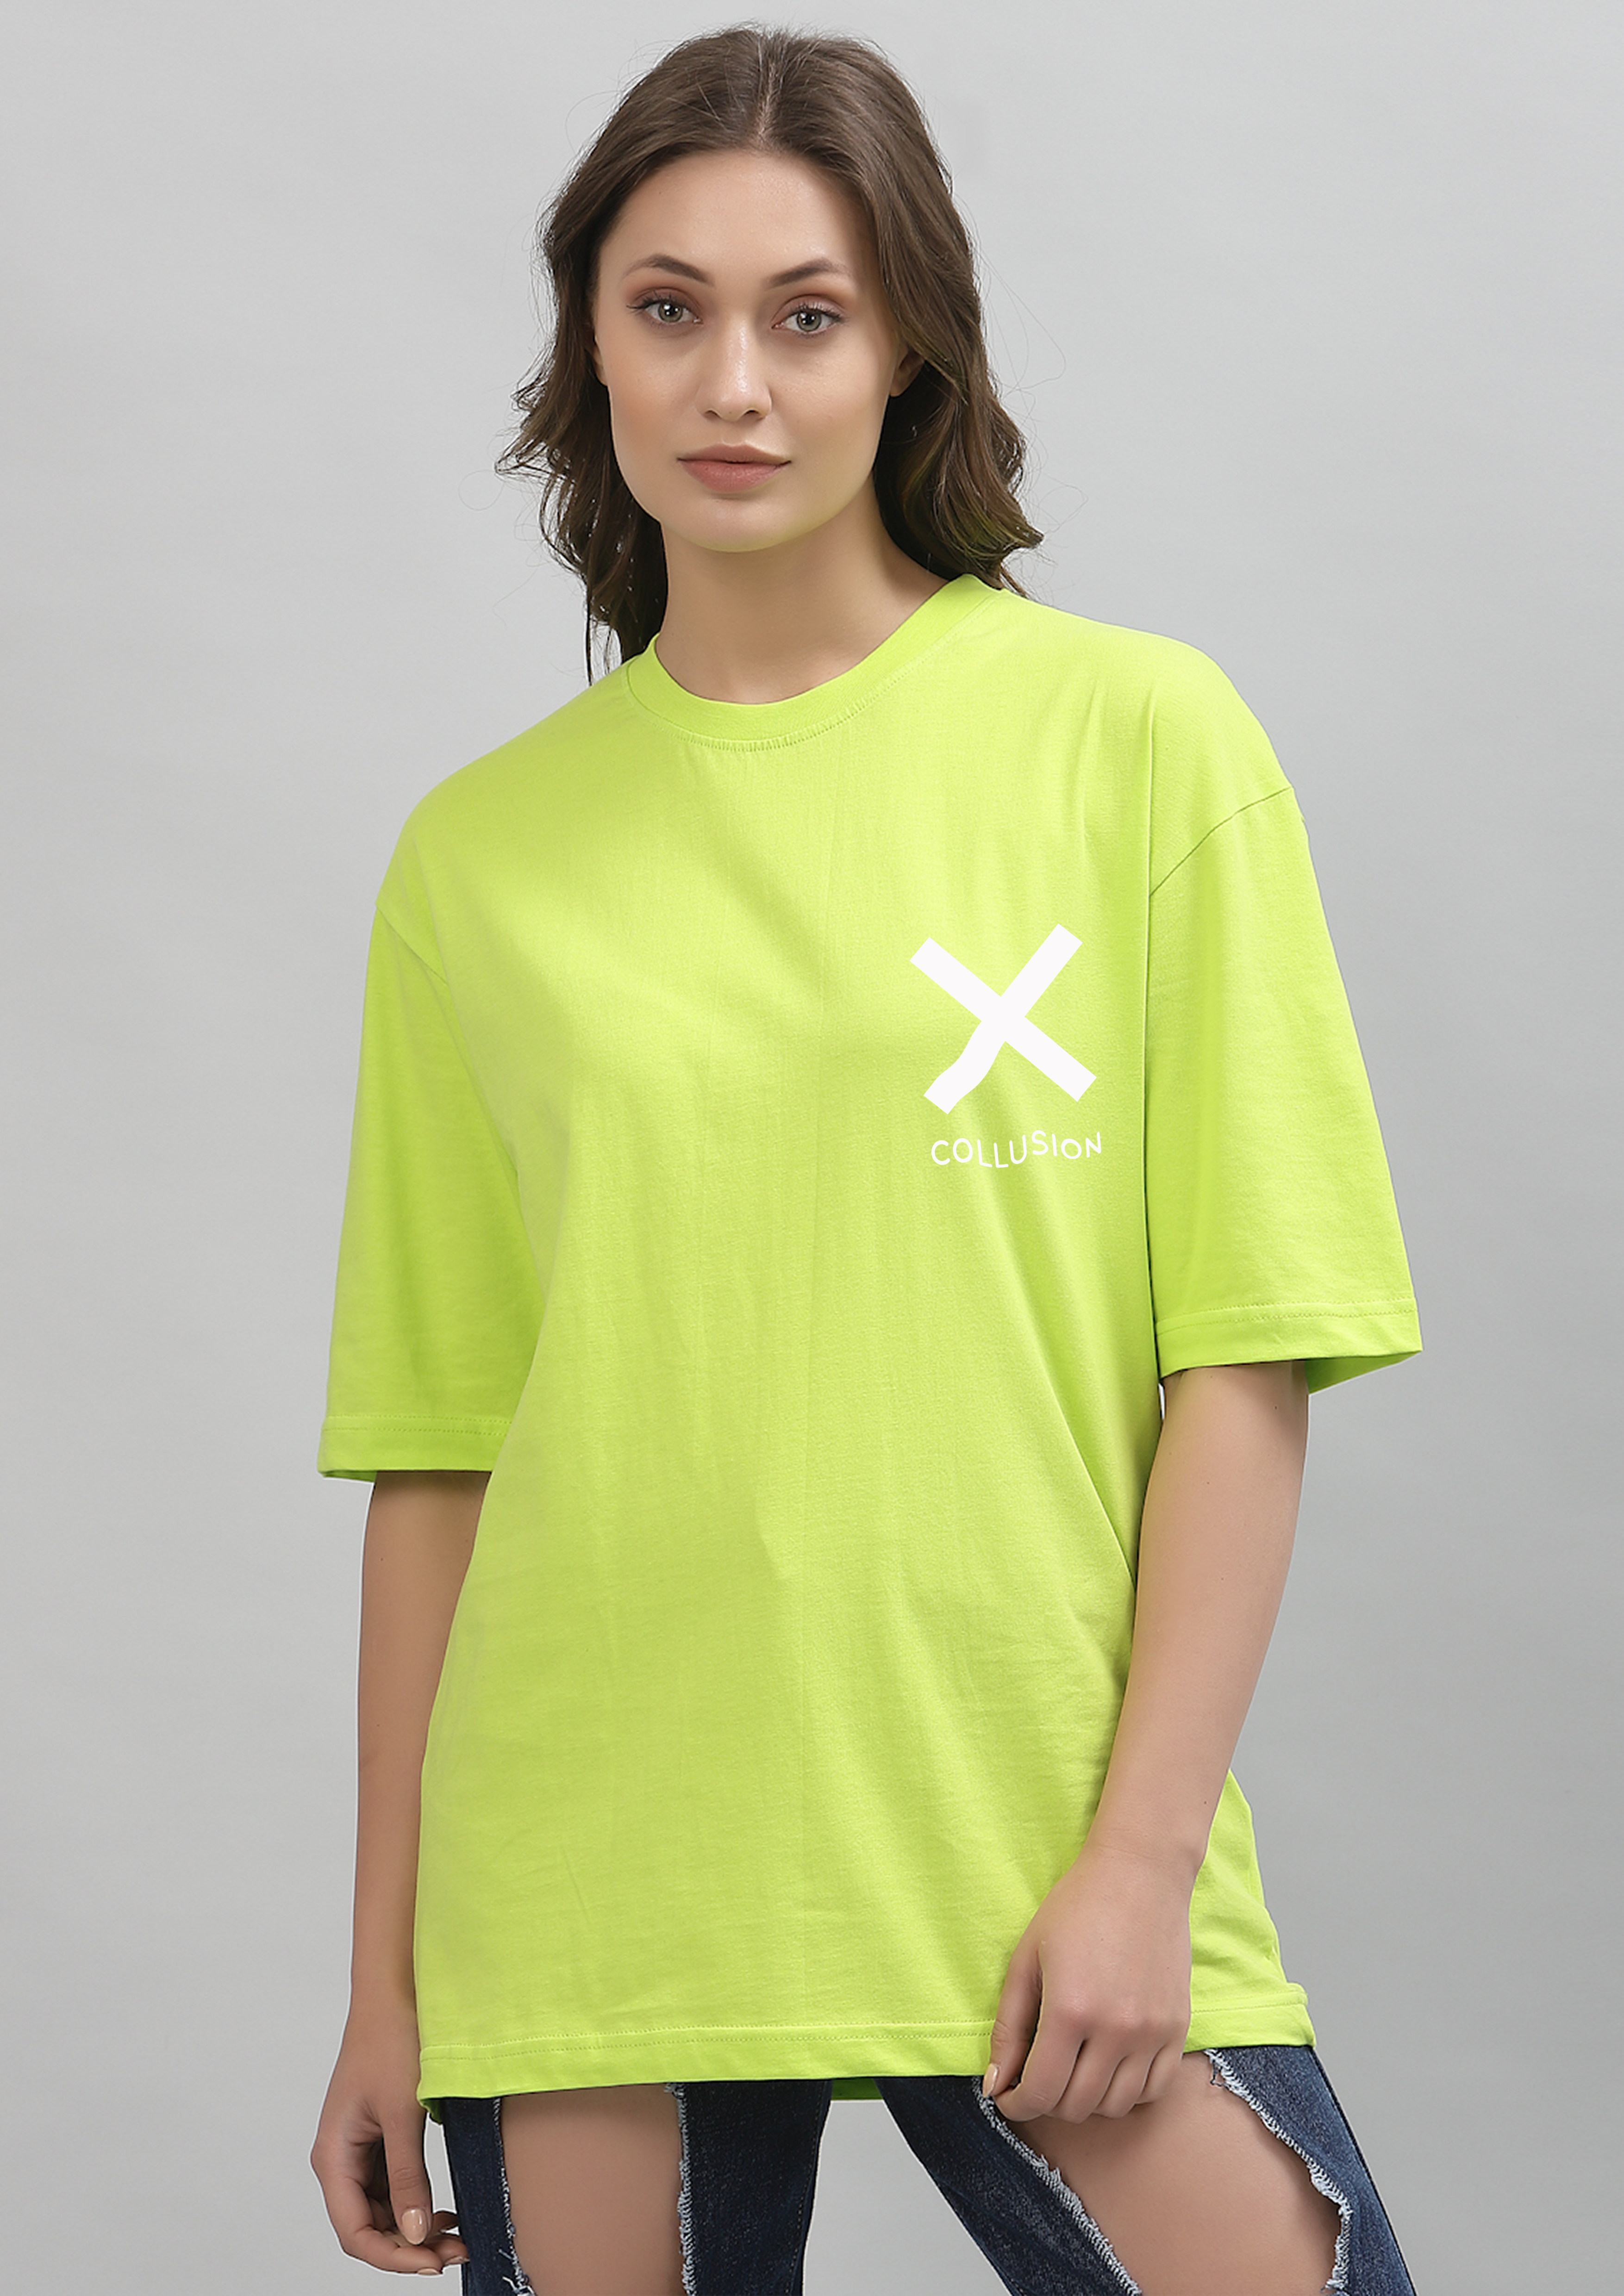 Collusion Neon Green Oversized Tee for Women